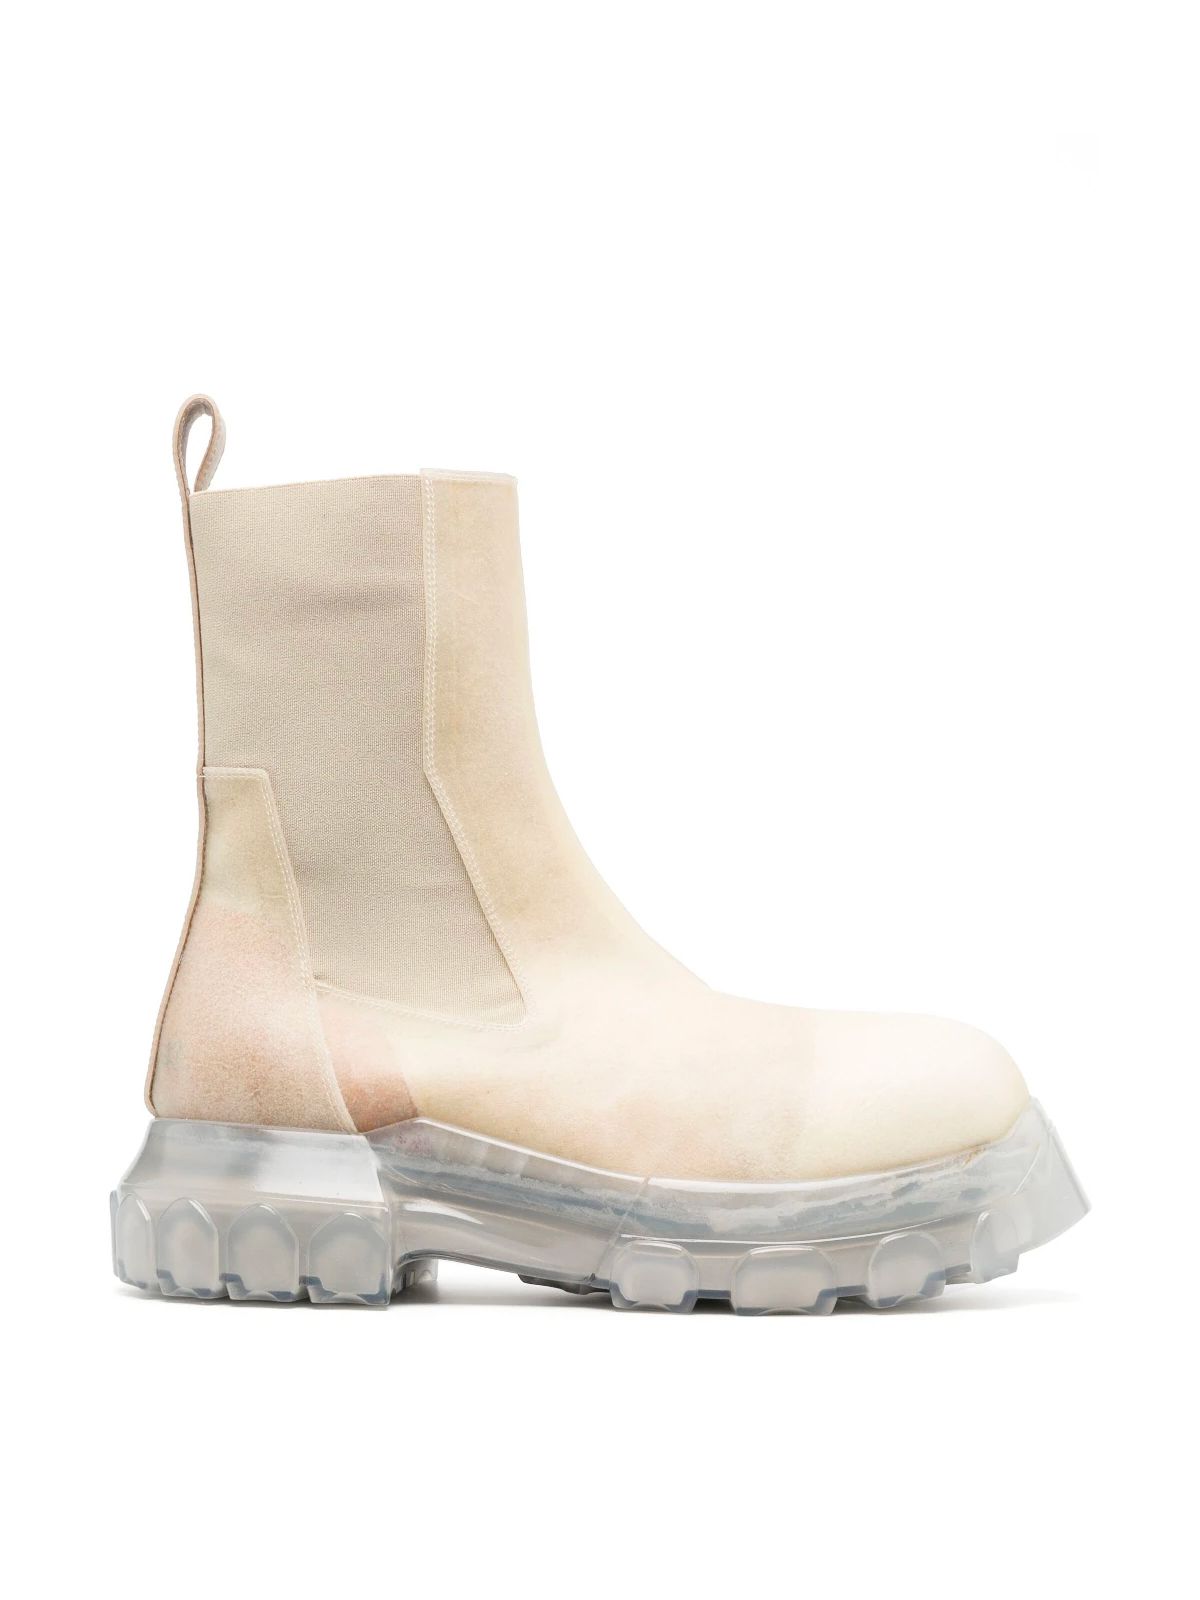 RICK OWENS MENS BOOTS: BEATLE BOZO TRACTOR,RU01C4881.LCT0